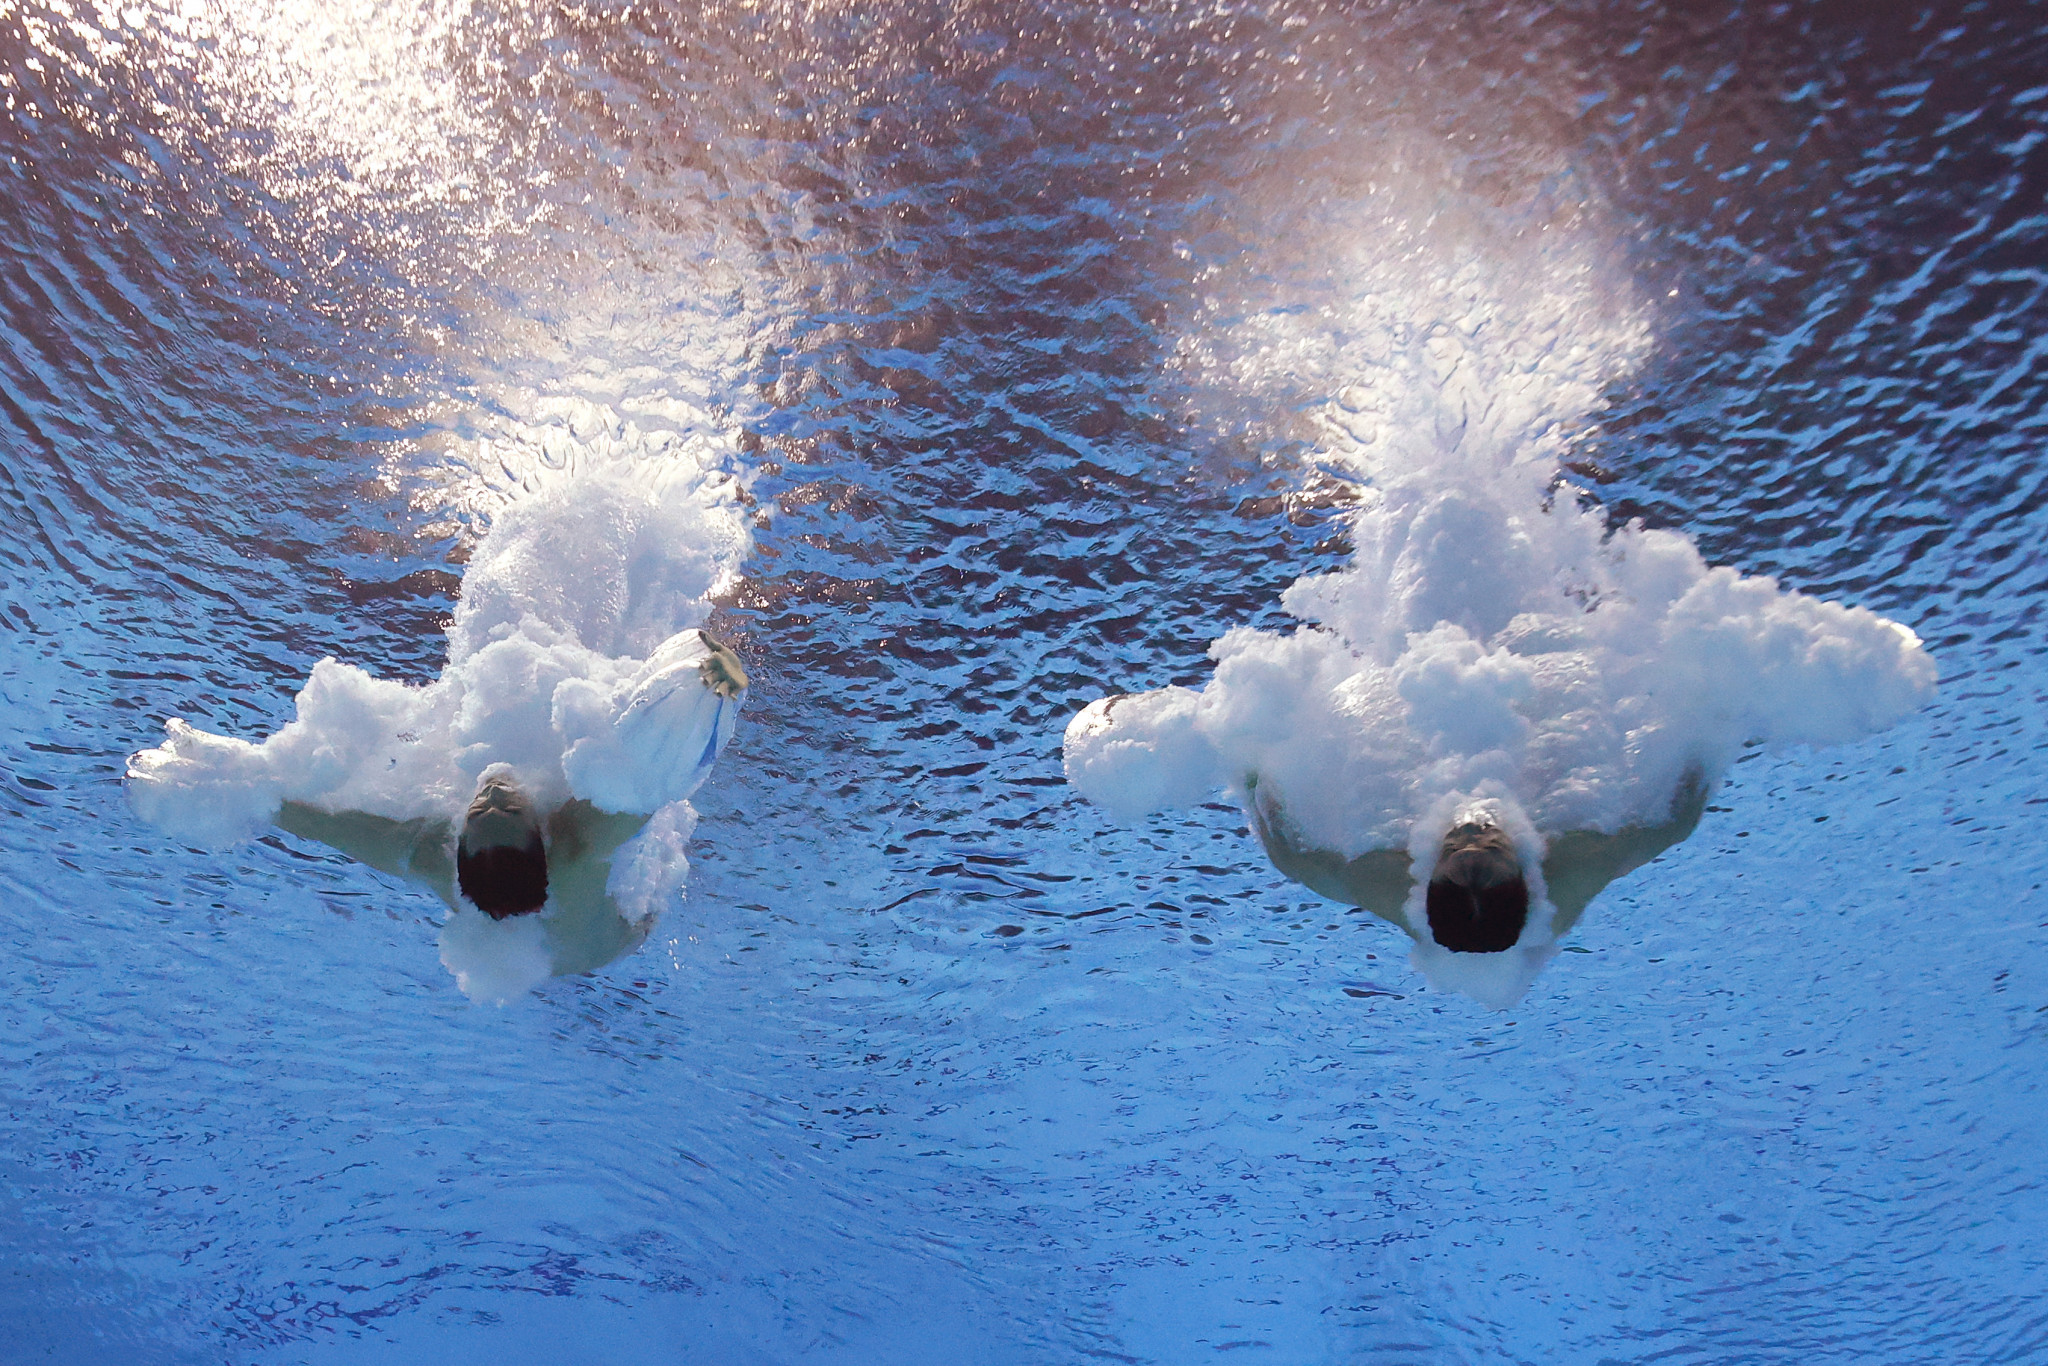 Lian and Yang dominate men's 10m platform synchronised diving final